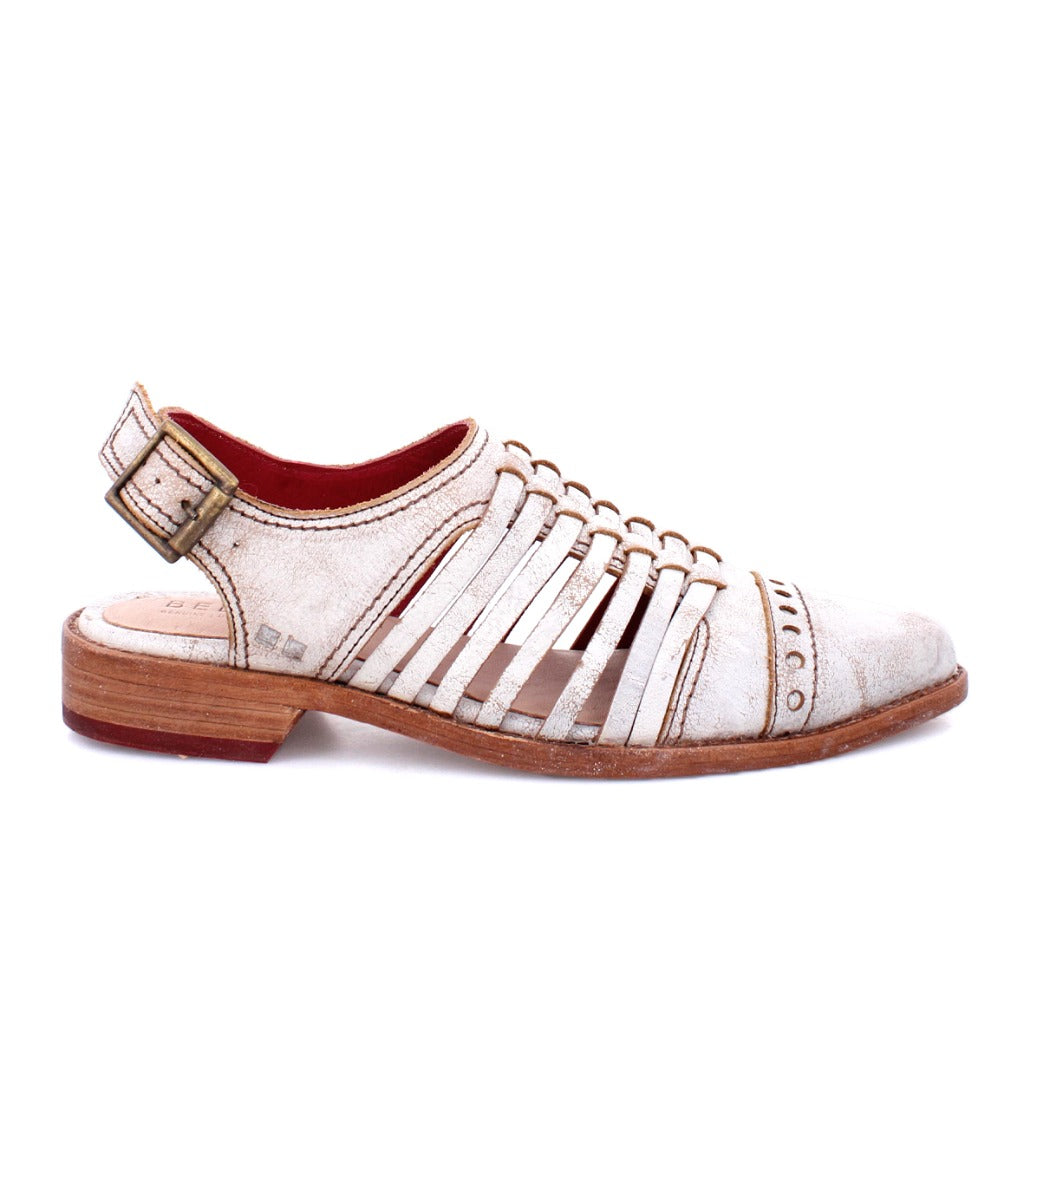 A women's white leather sandal called the Kennya by Bed Stu.